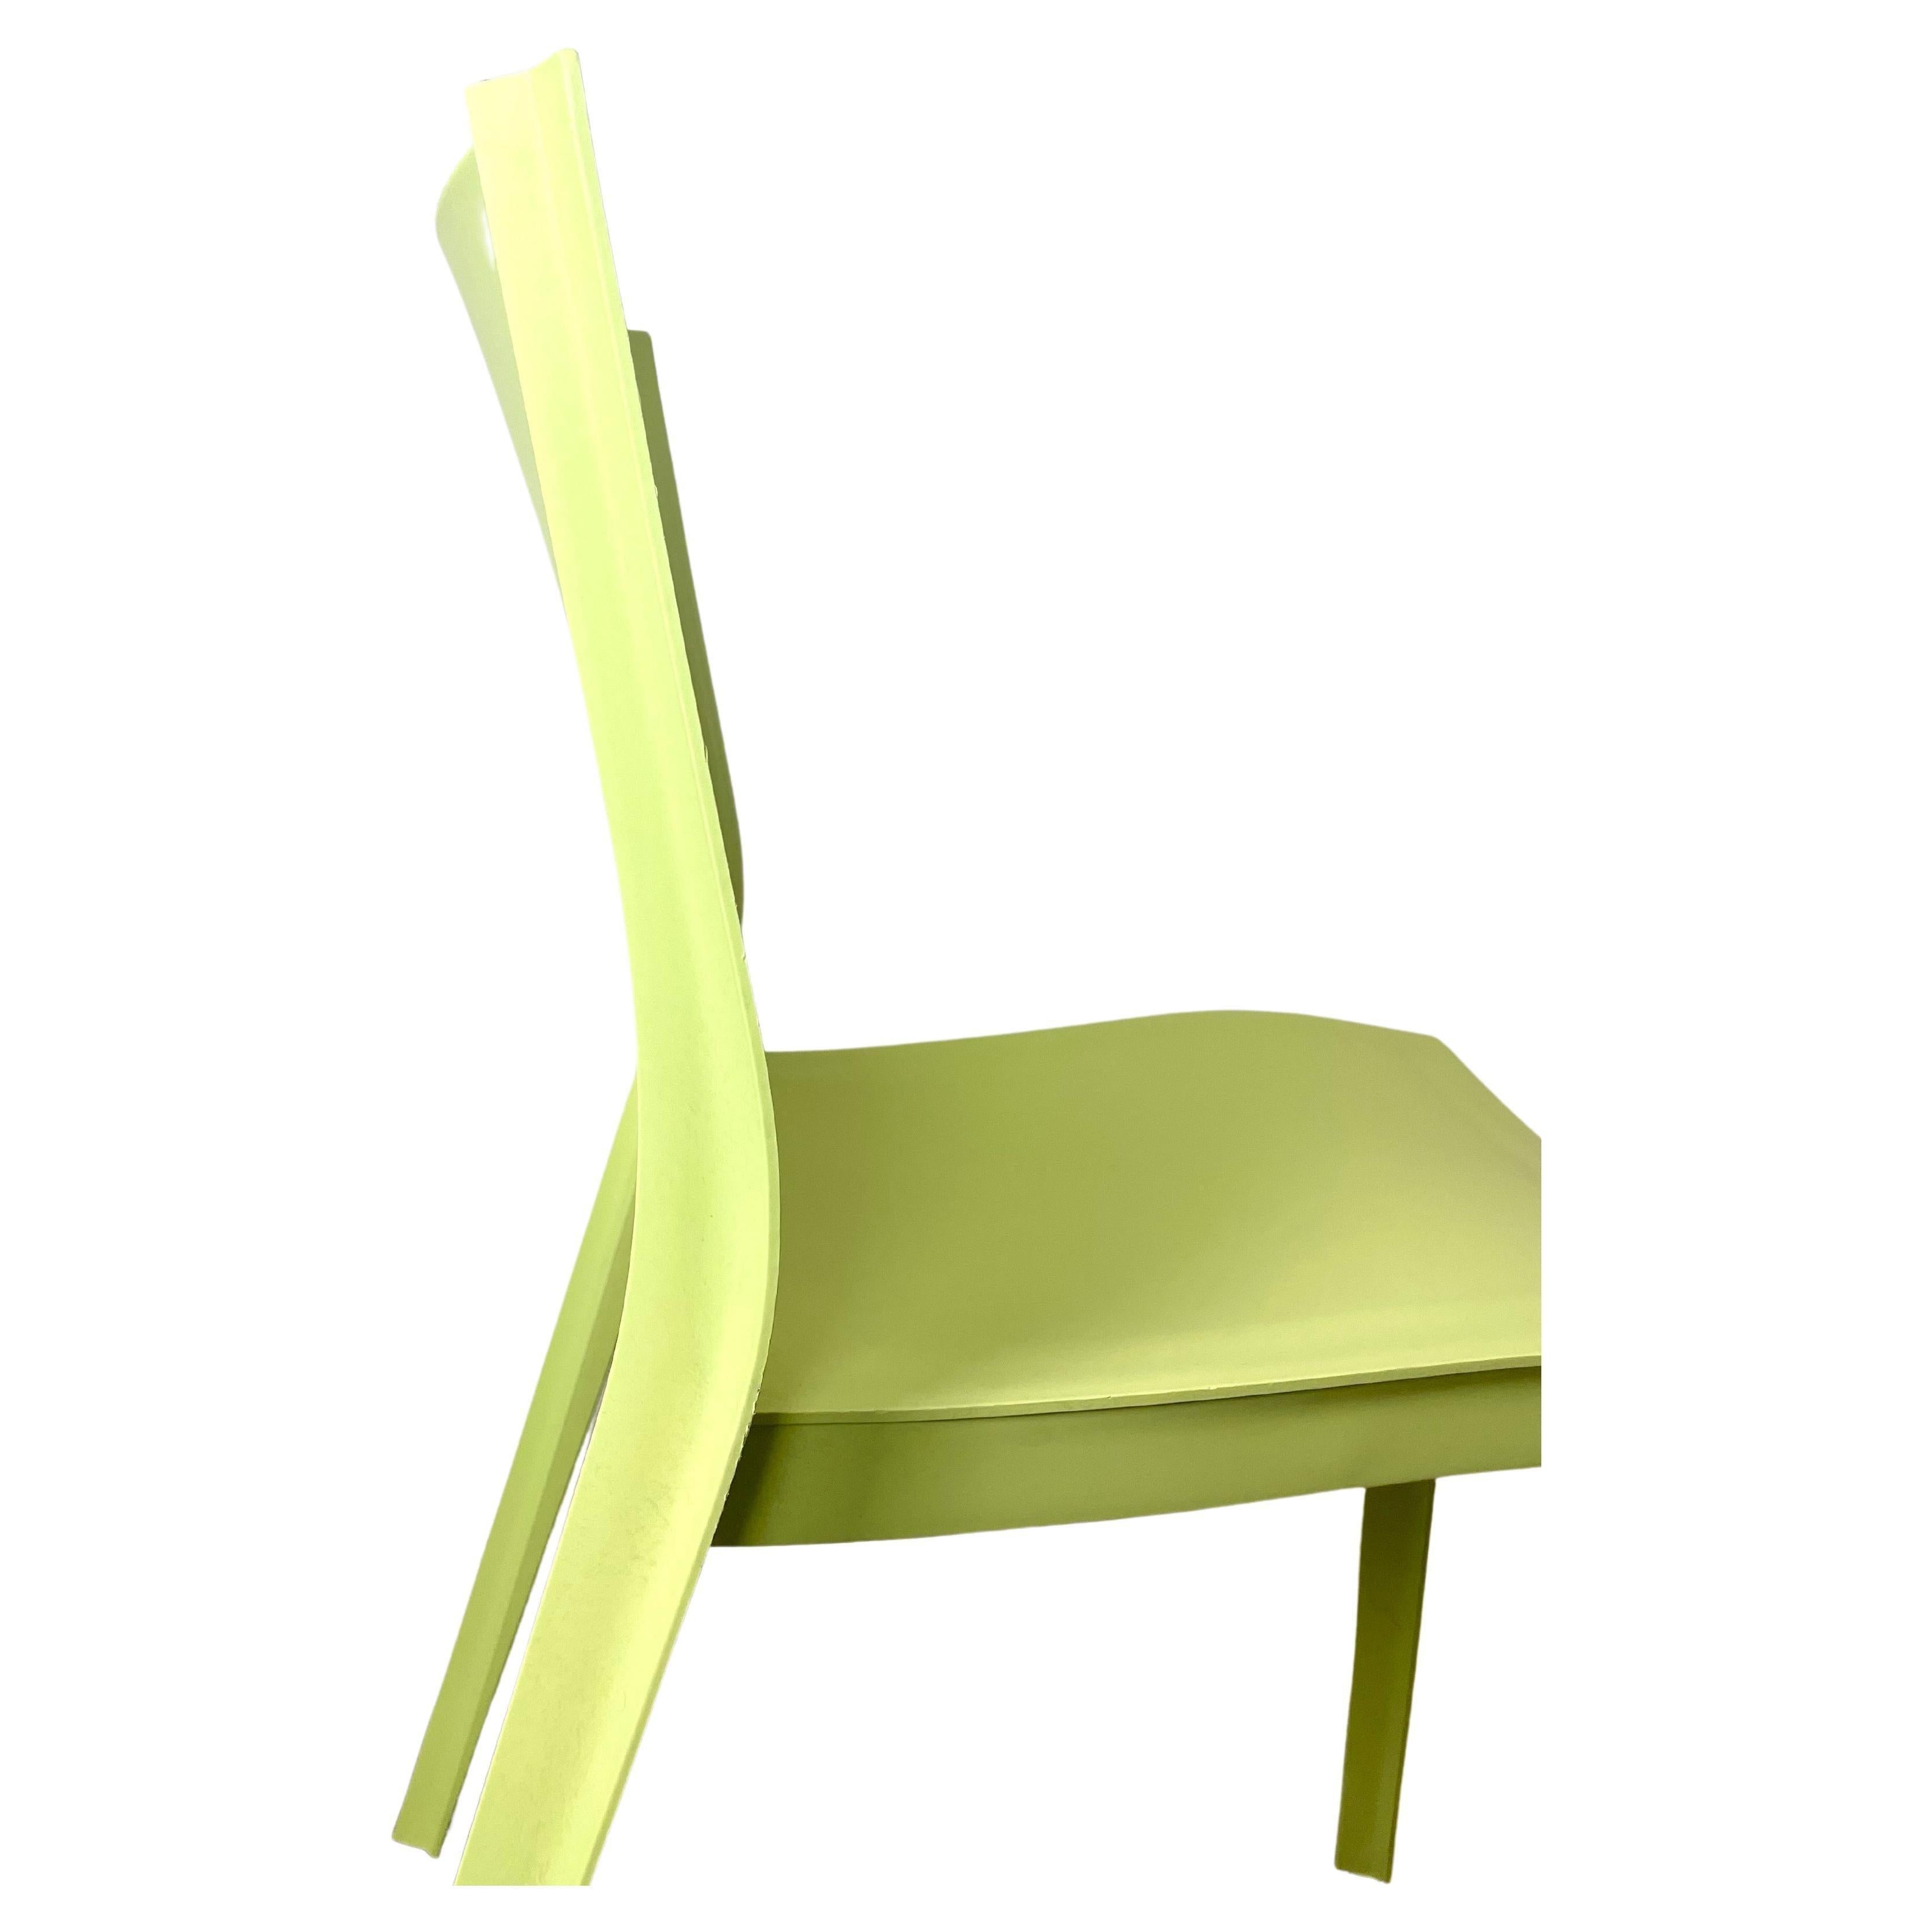 Philippe Starck, Set of 2 French Green Chairs, Design Slick Slick XO - France In Good Condition For Sale In Beuzevillette, FR